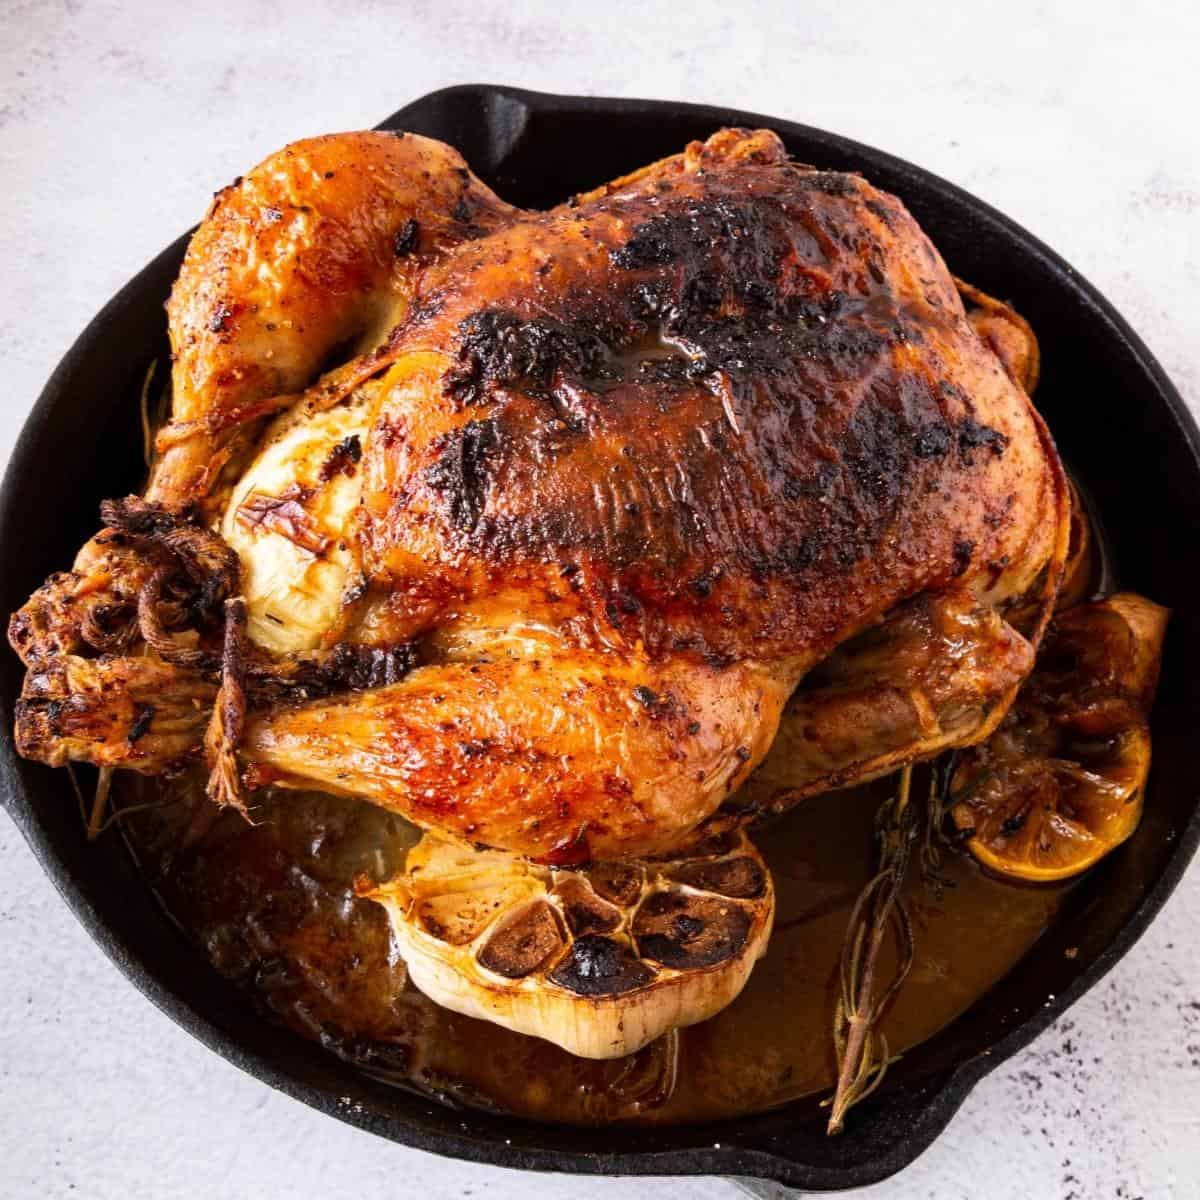 A skillet with roasted chicken.